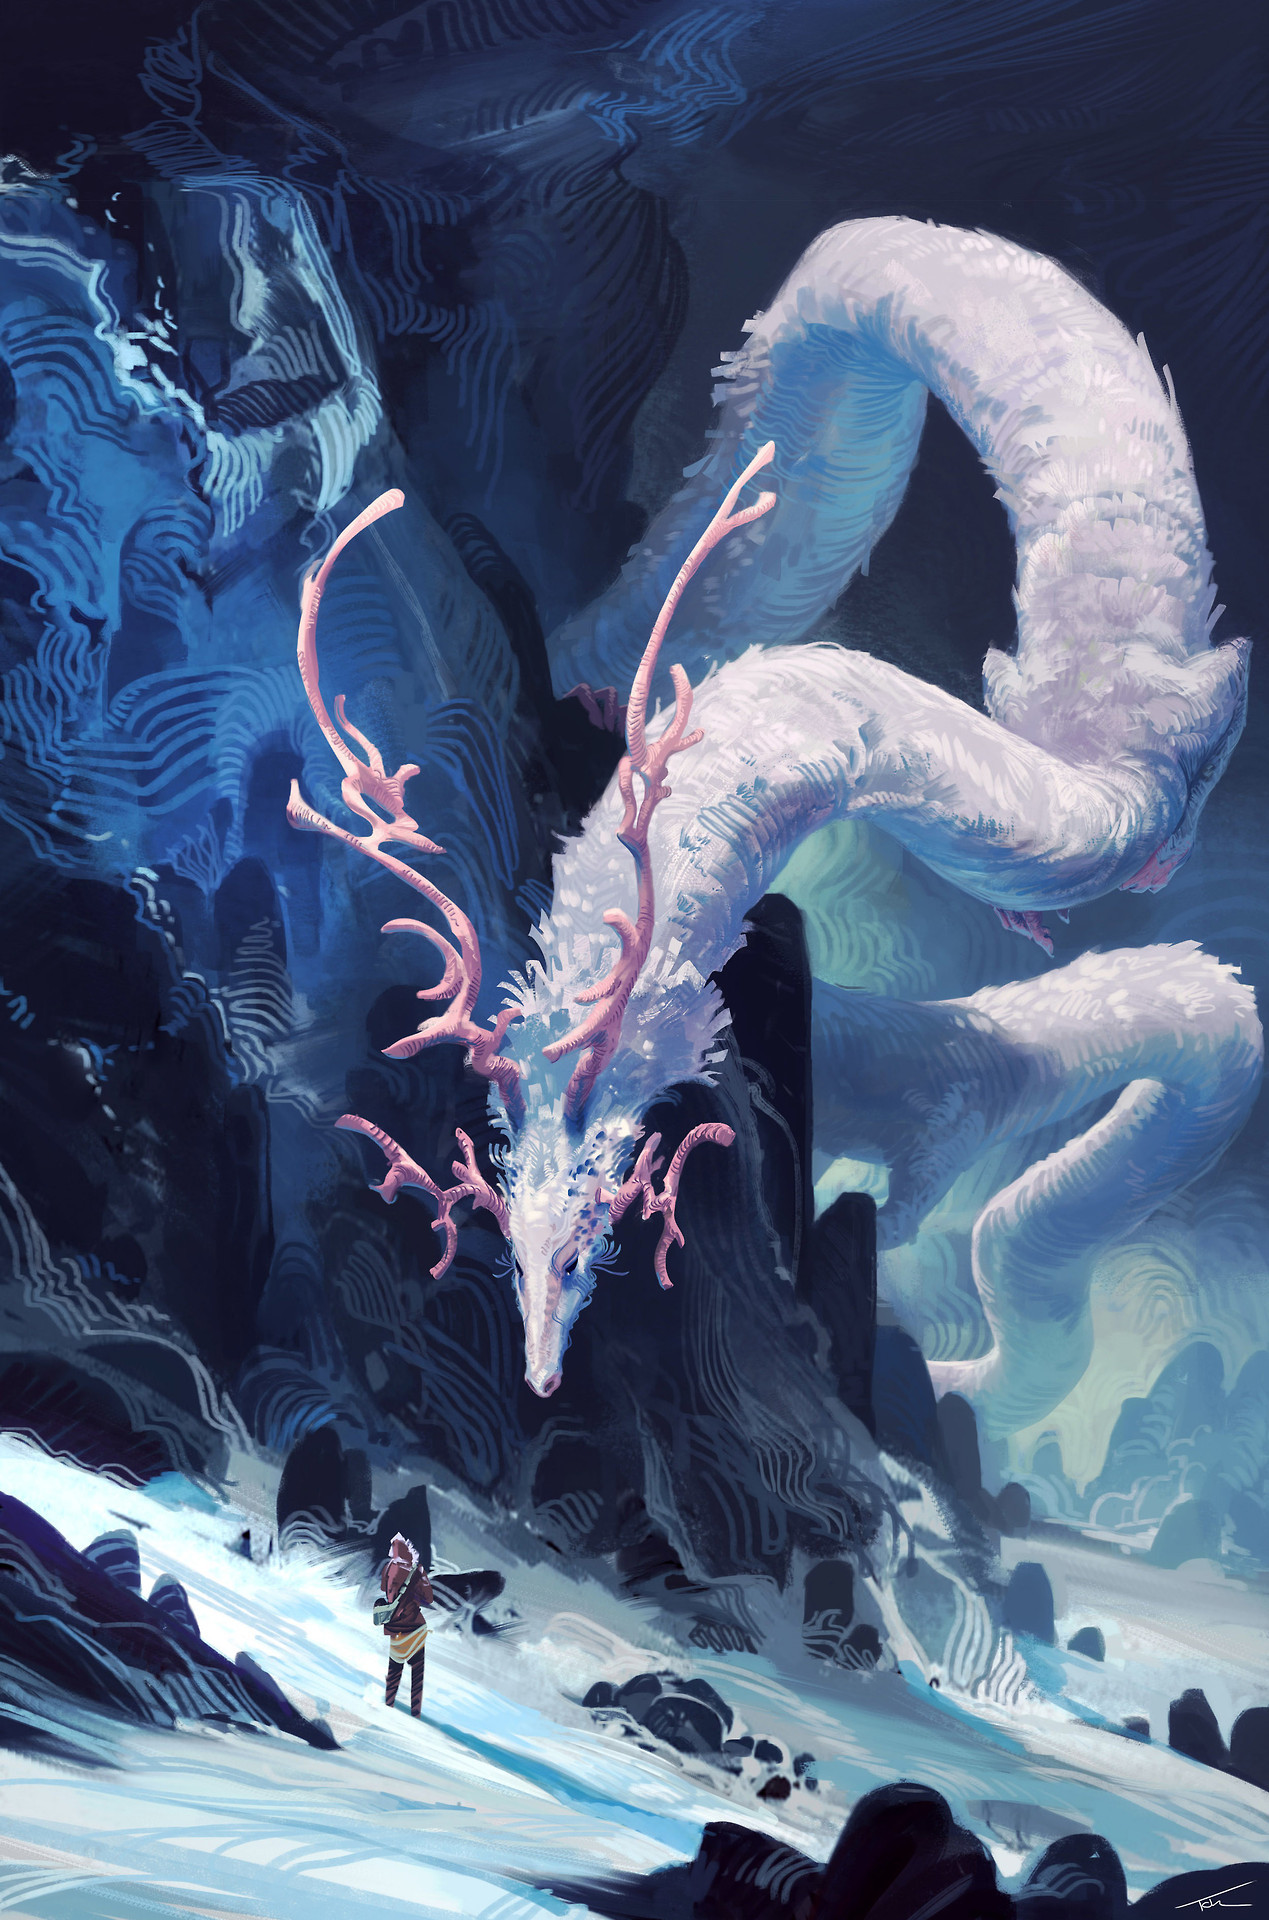 cinemagorgeous:Spirit of the Mountain by artist Thomas Chamberlain.